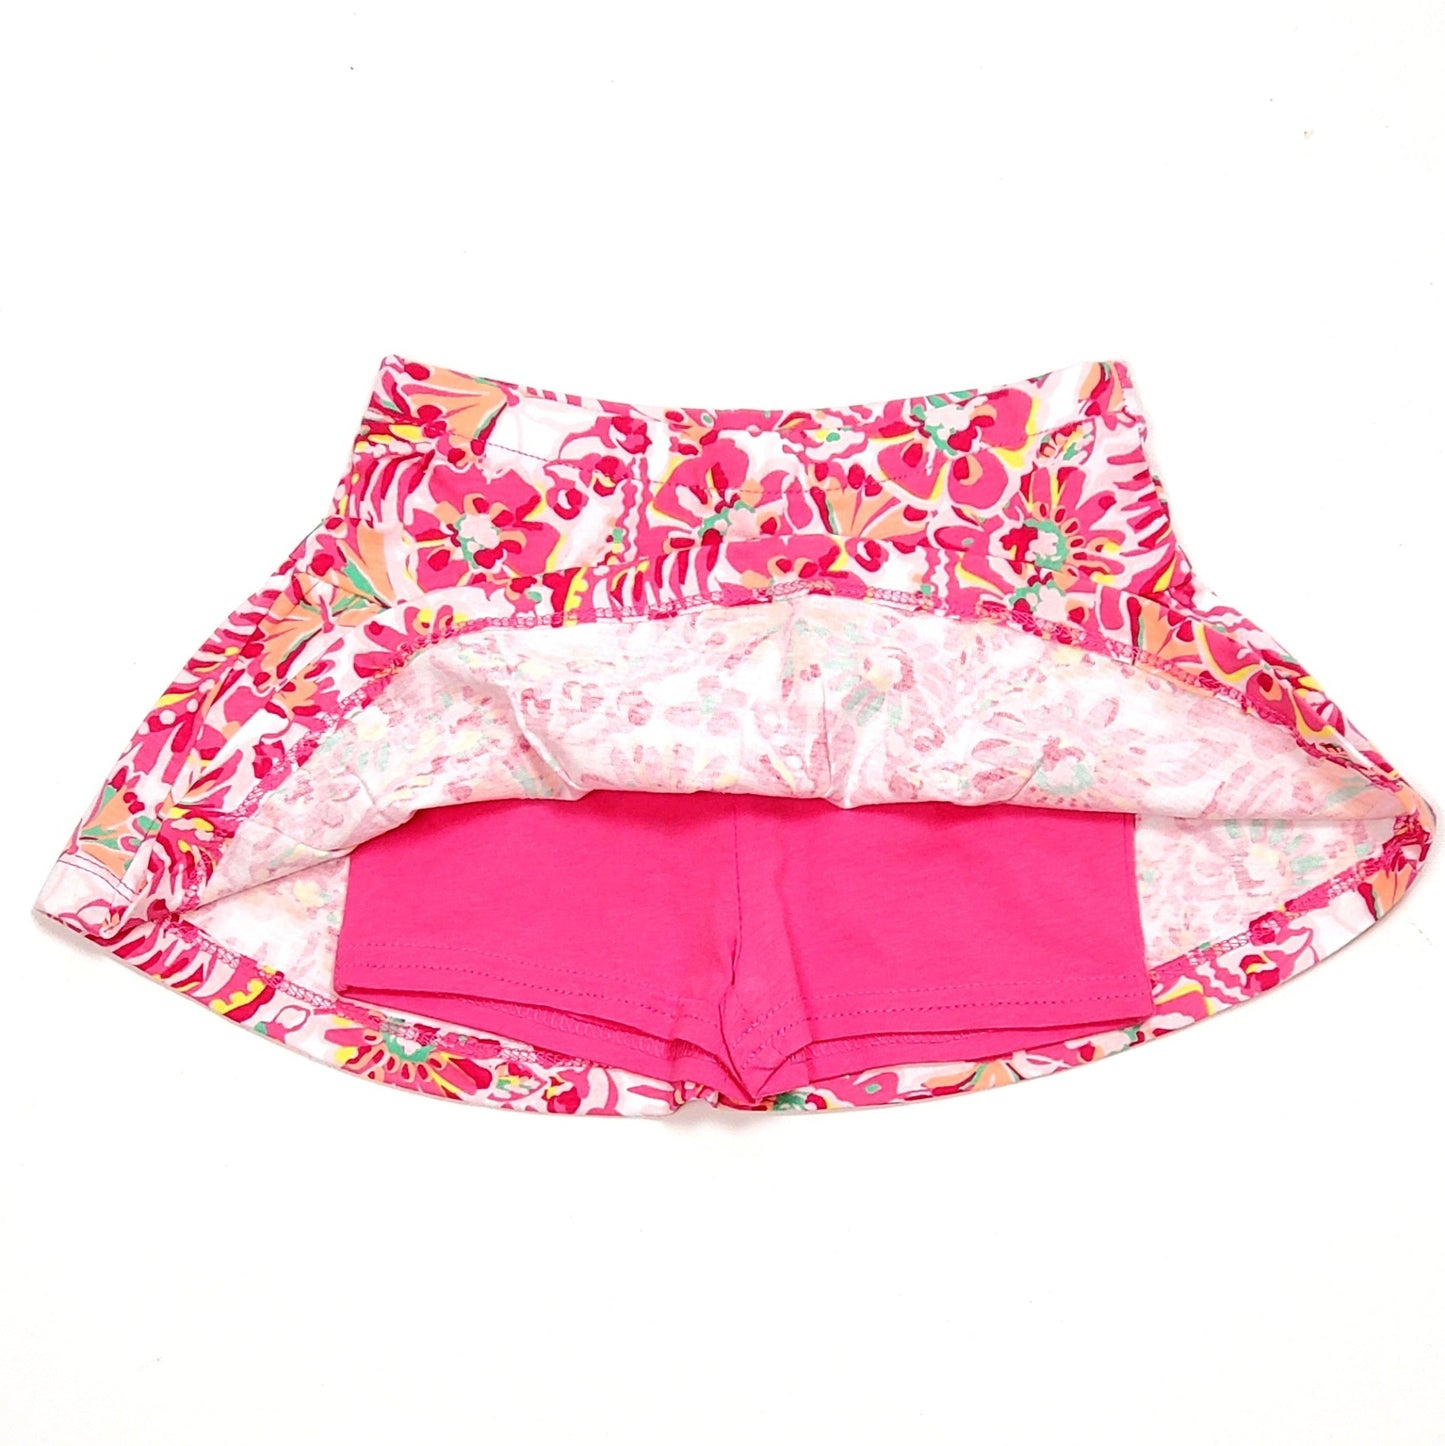 Childrens Place Girls Skort 2T Pink Floral Print Used View 2